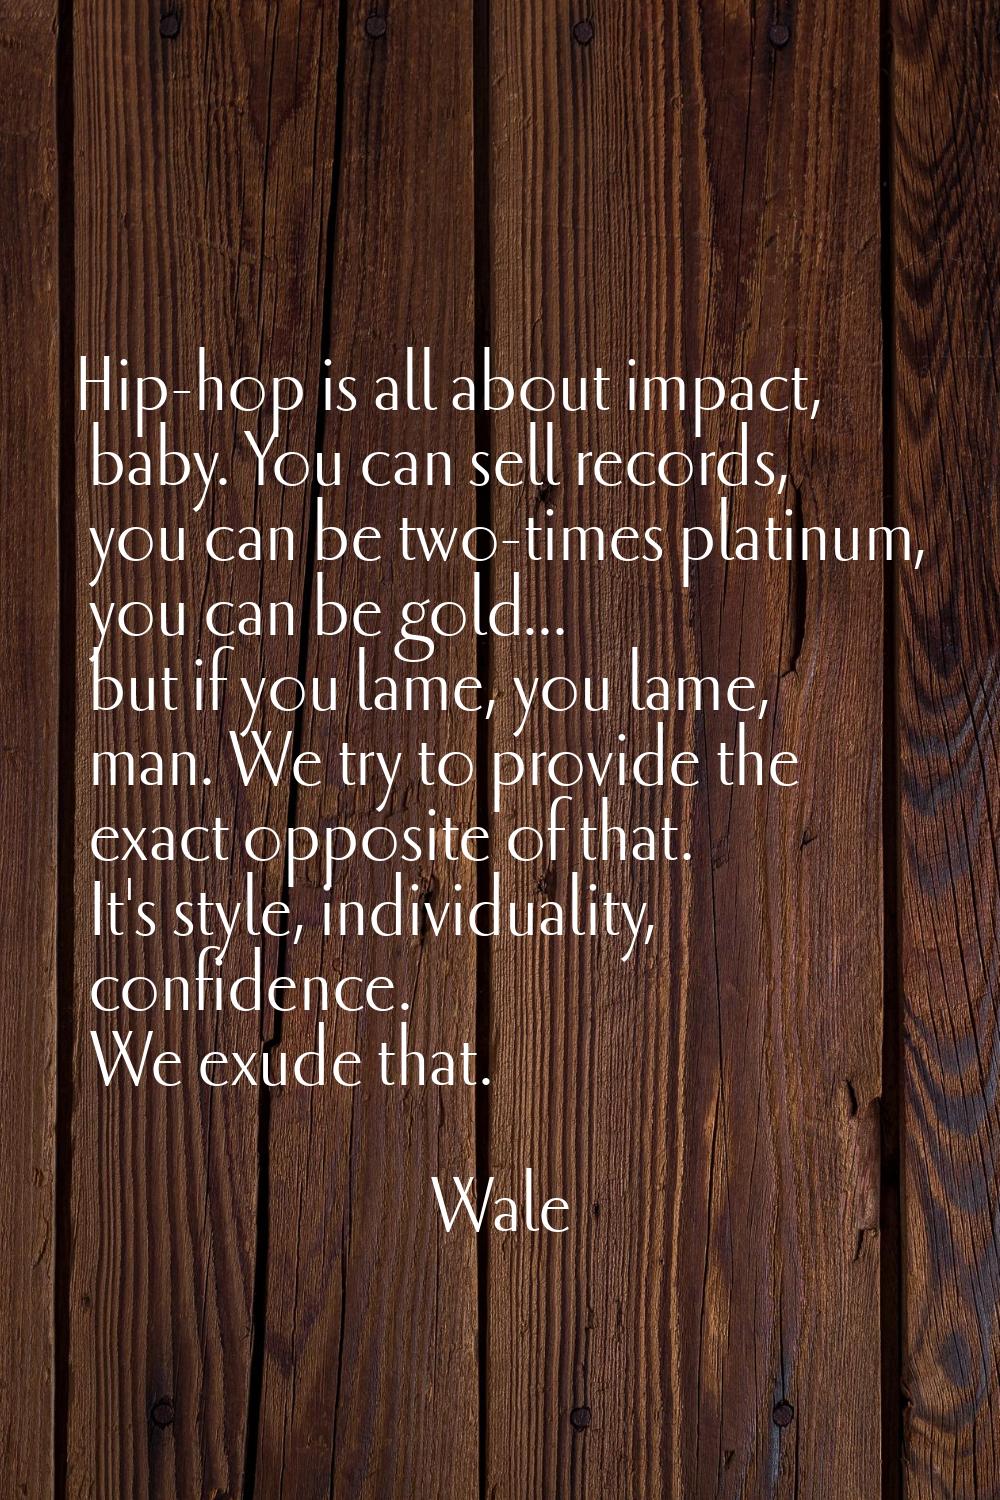 Hip-hop is all about impact, baby. You can sell records, you can be two-times platinum, you can be 